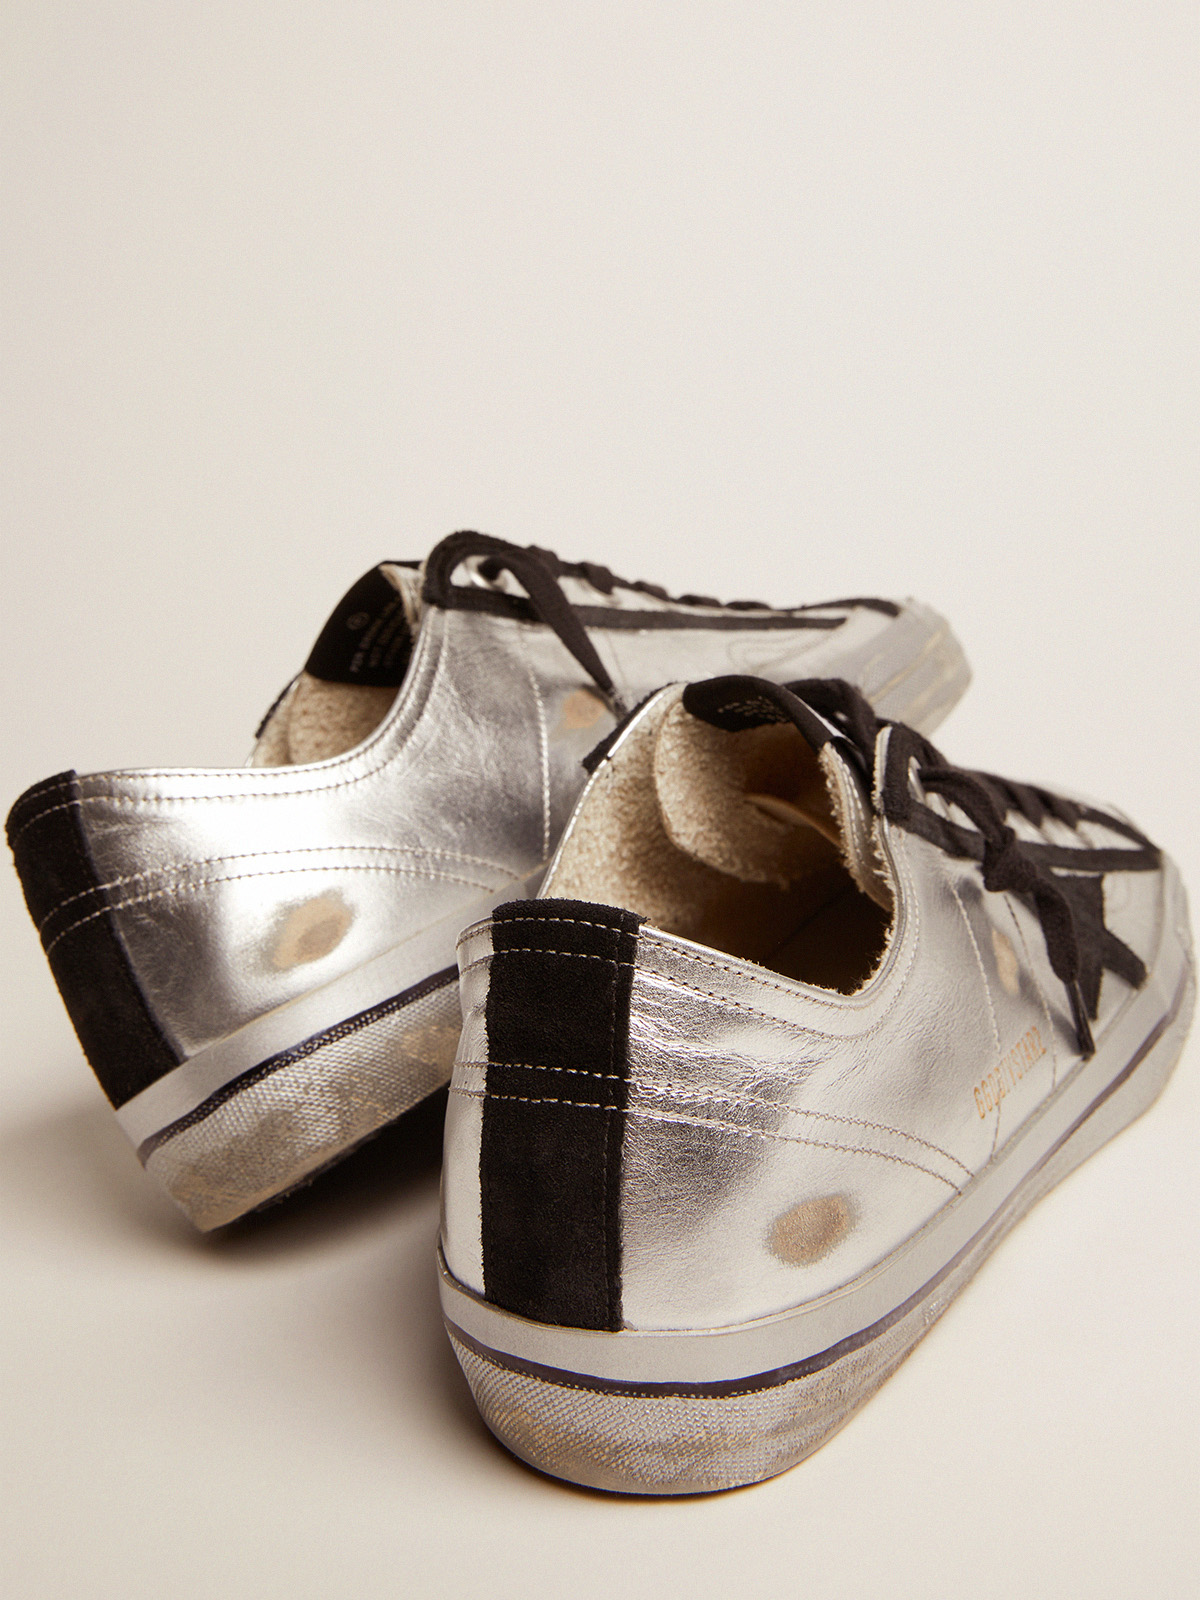 V-Star sneakers in silver laminated leather with black suede details |  Golden Goose